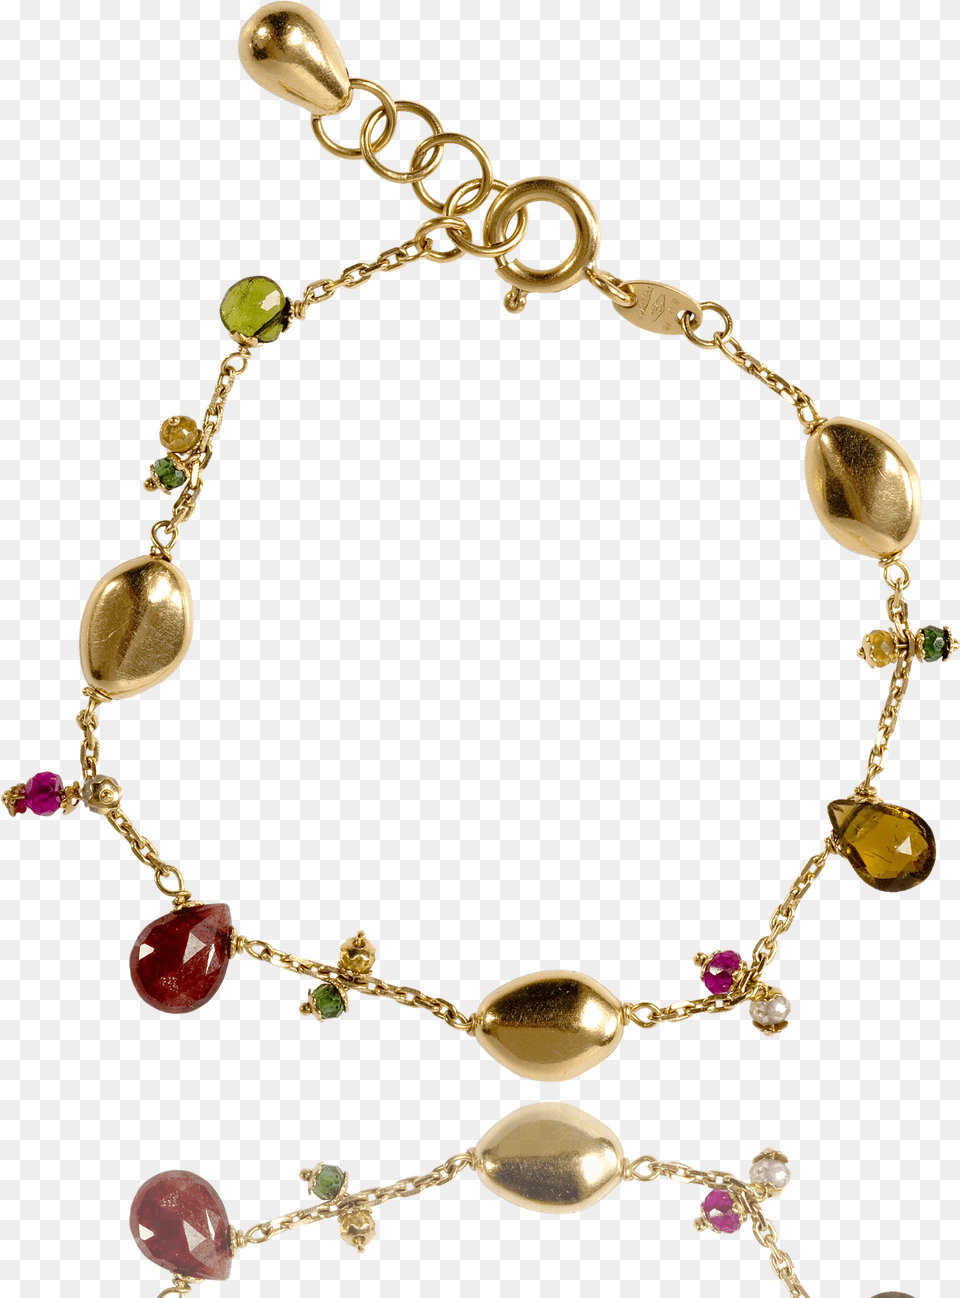 Necklace, Accessories, Bracelet, Jewelry Png